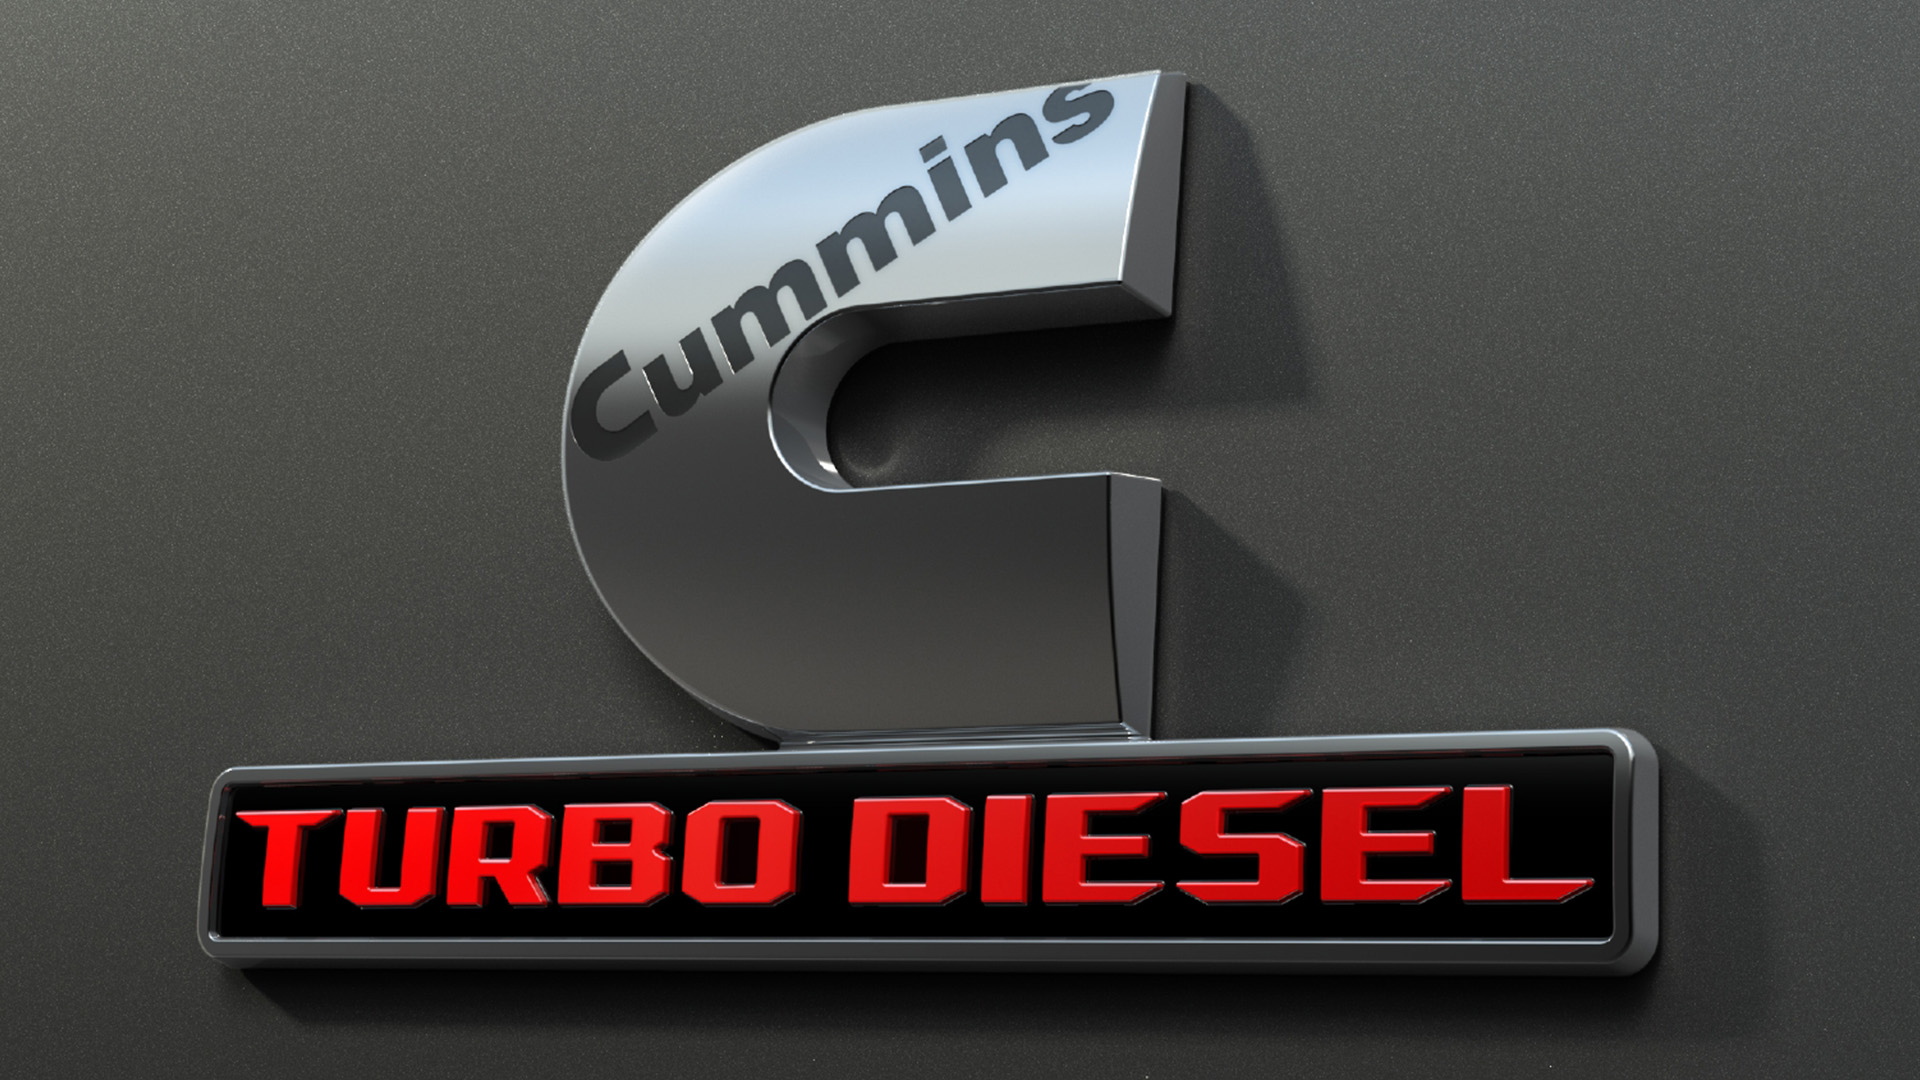 Federal authorities have disclosed the specifics of the $2 billion settlement with Cummins over diesel emissions tampering.